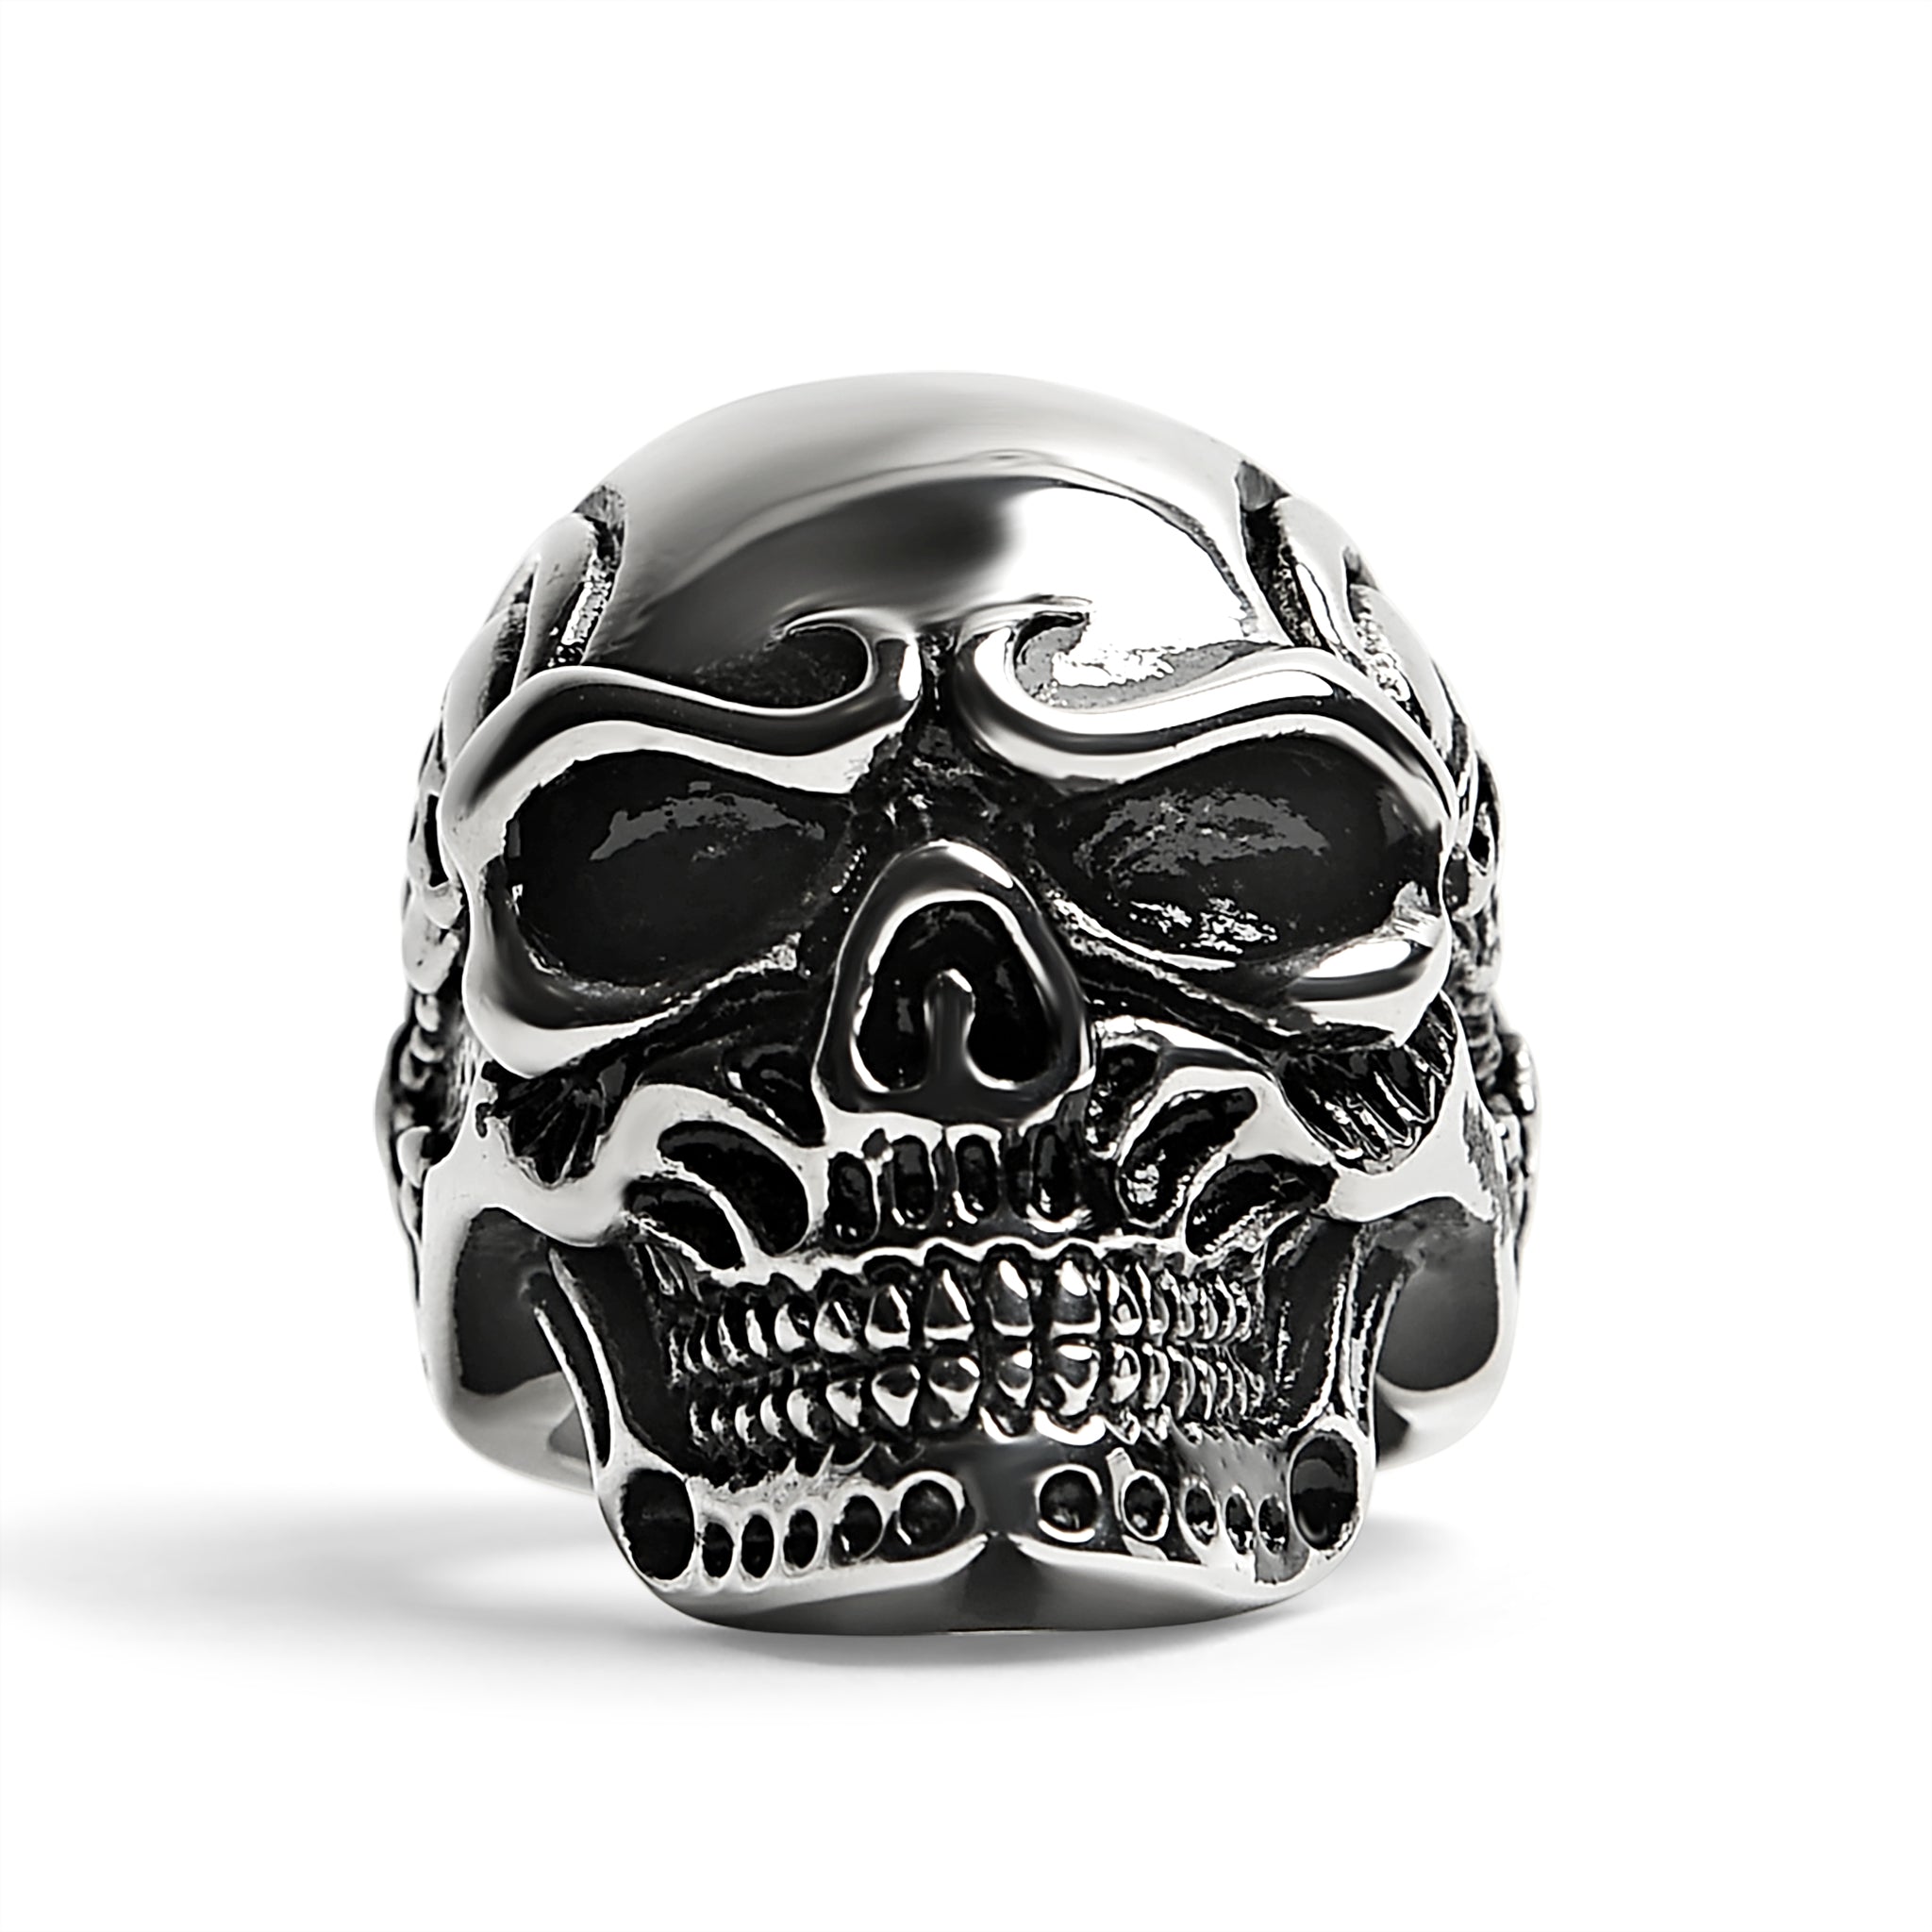 Stainless Steel Skull Ring with Skeleton Accents - Durable and Hypoallergenic - Jewelry & Watches - Bijou Her -  -  - 